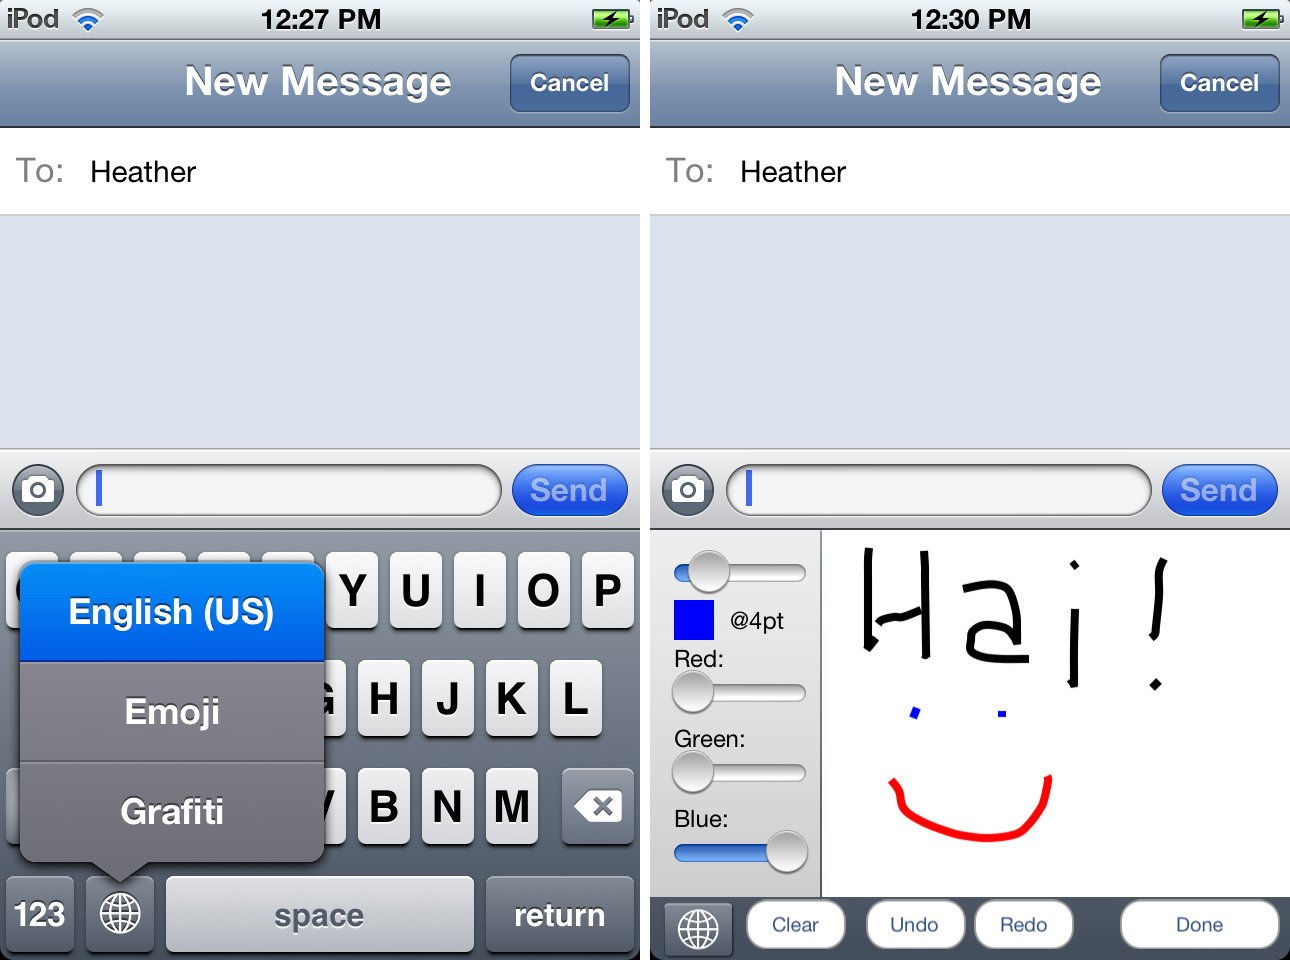 How to activate and draw a message with Grafiti for iPhone